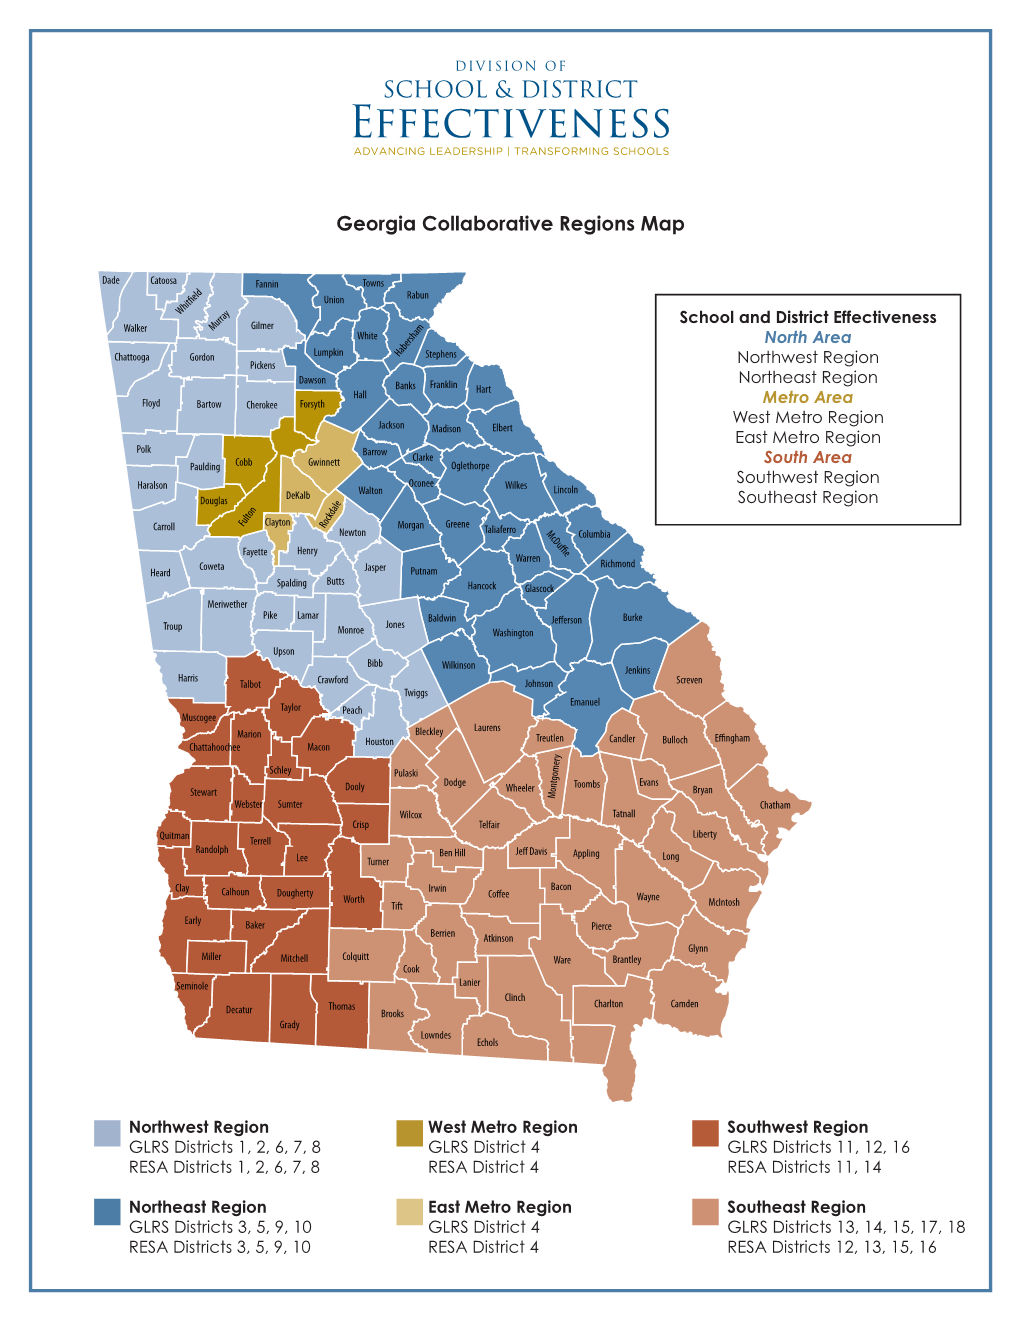 Georgia Collaborative Regions Map with GLRS and RESA Listing.Pdf